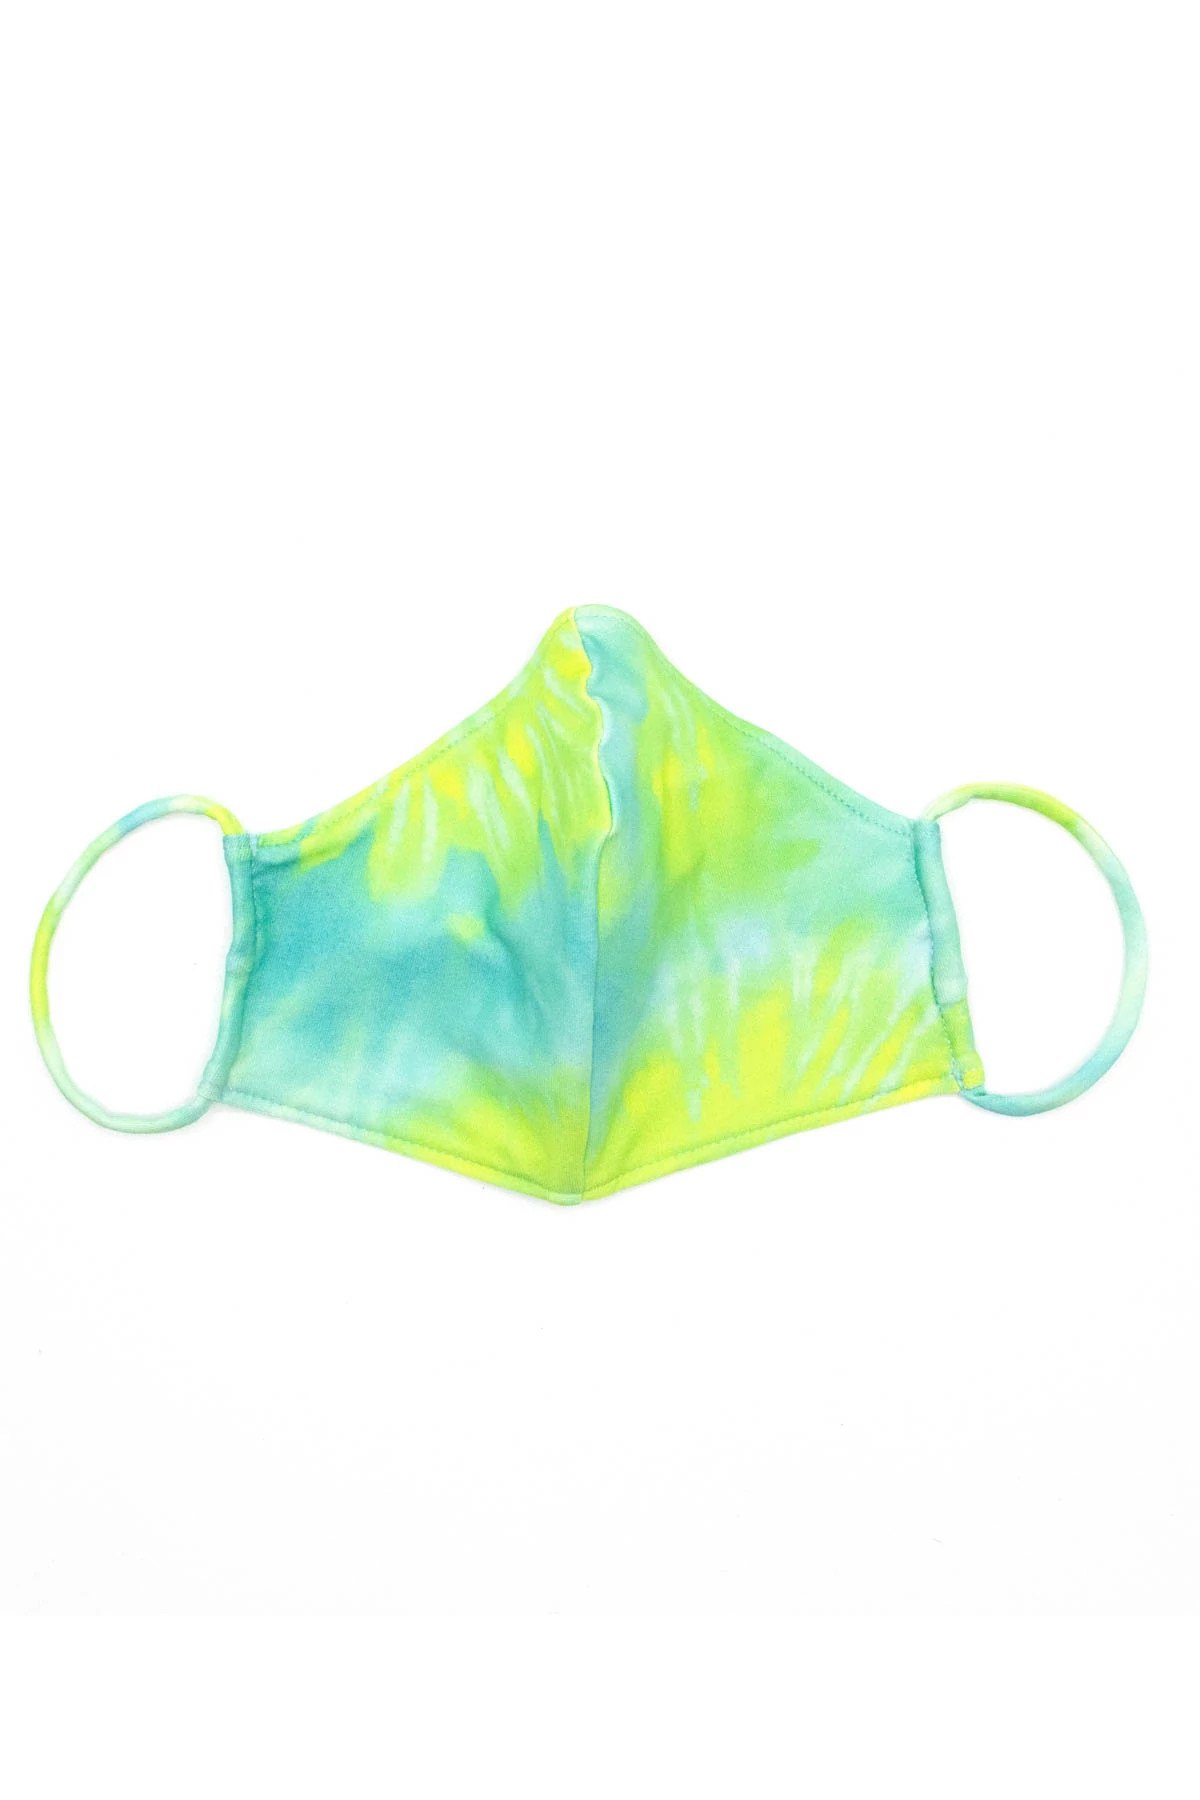 MULTI Lagoon Tie Dye Adult Face Mask image number 1